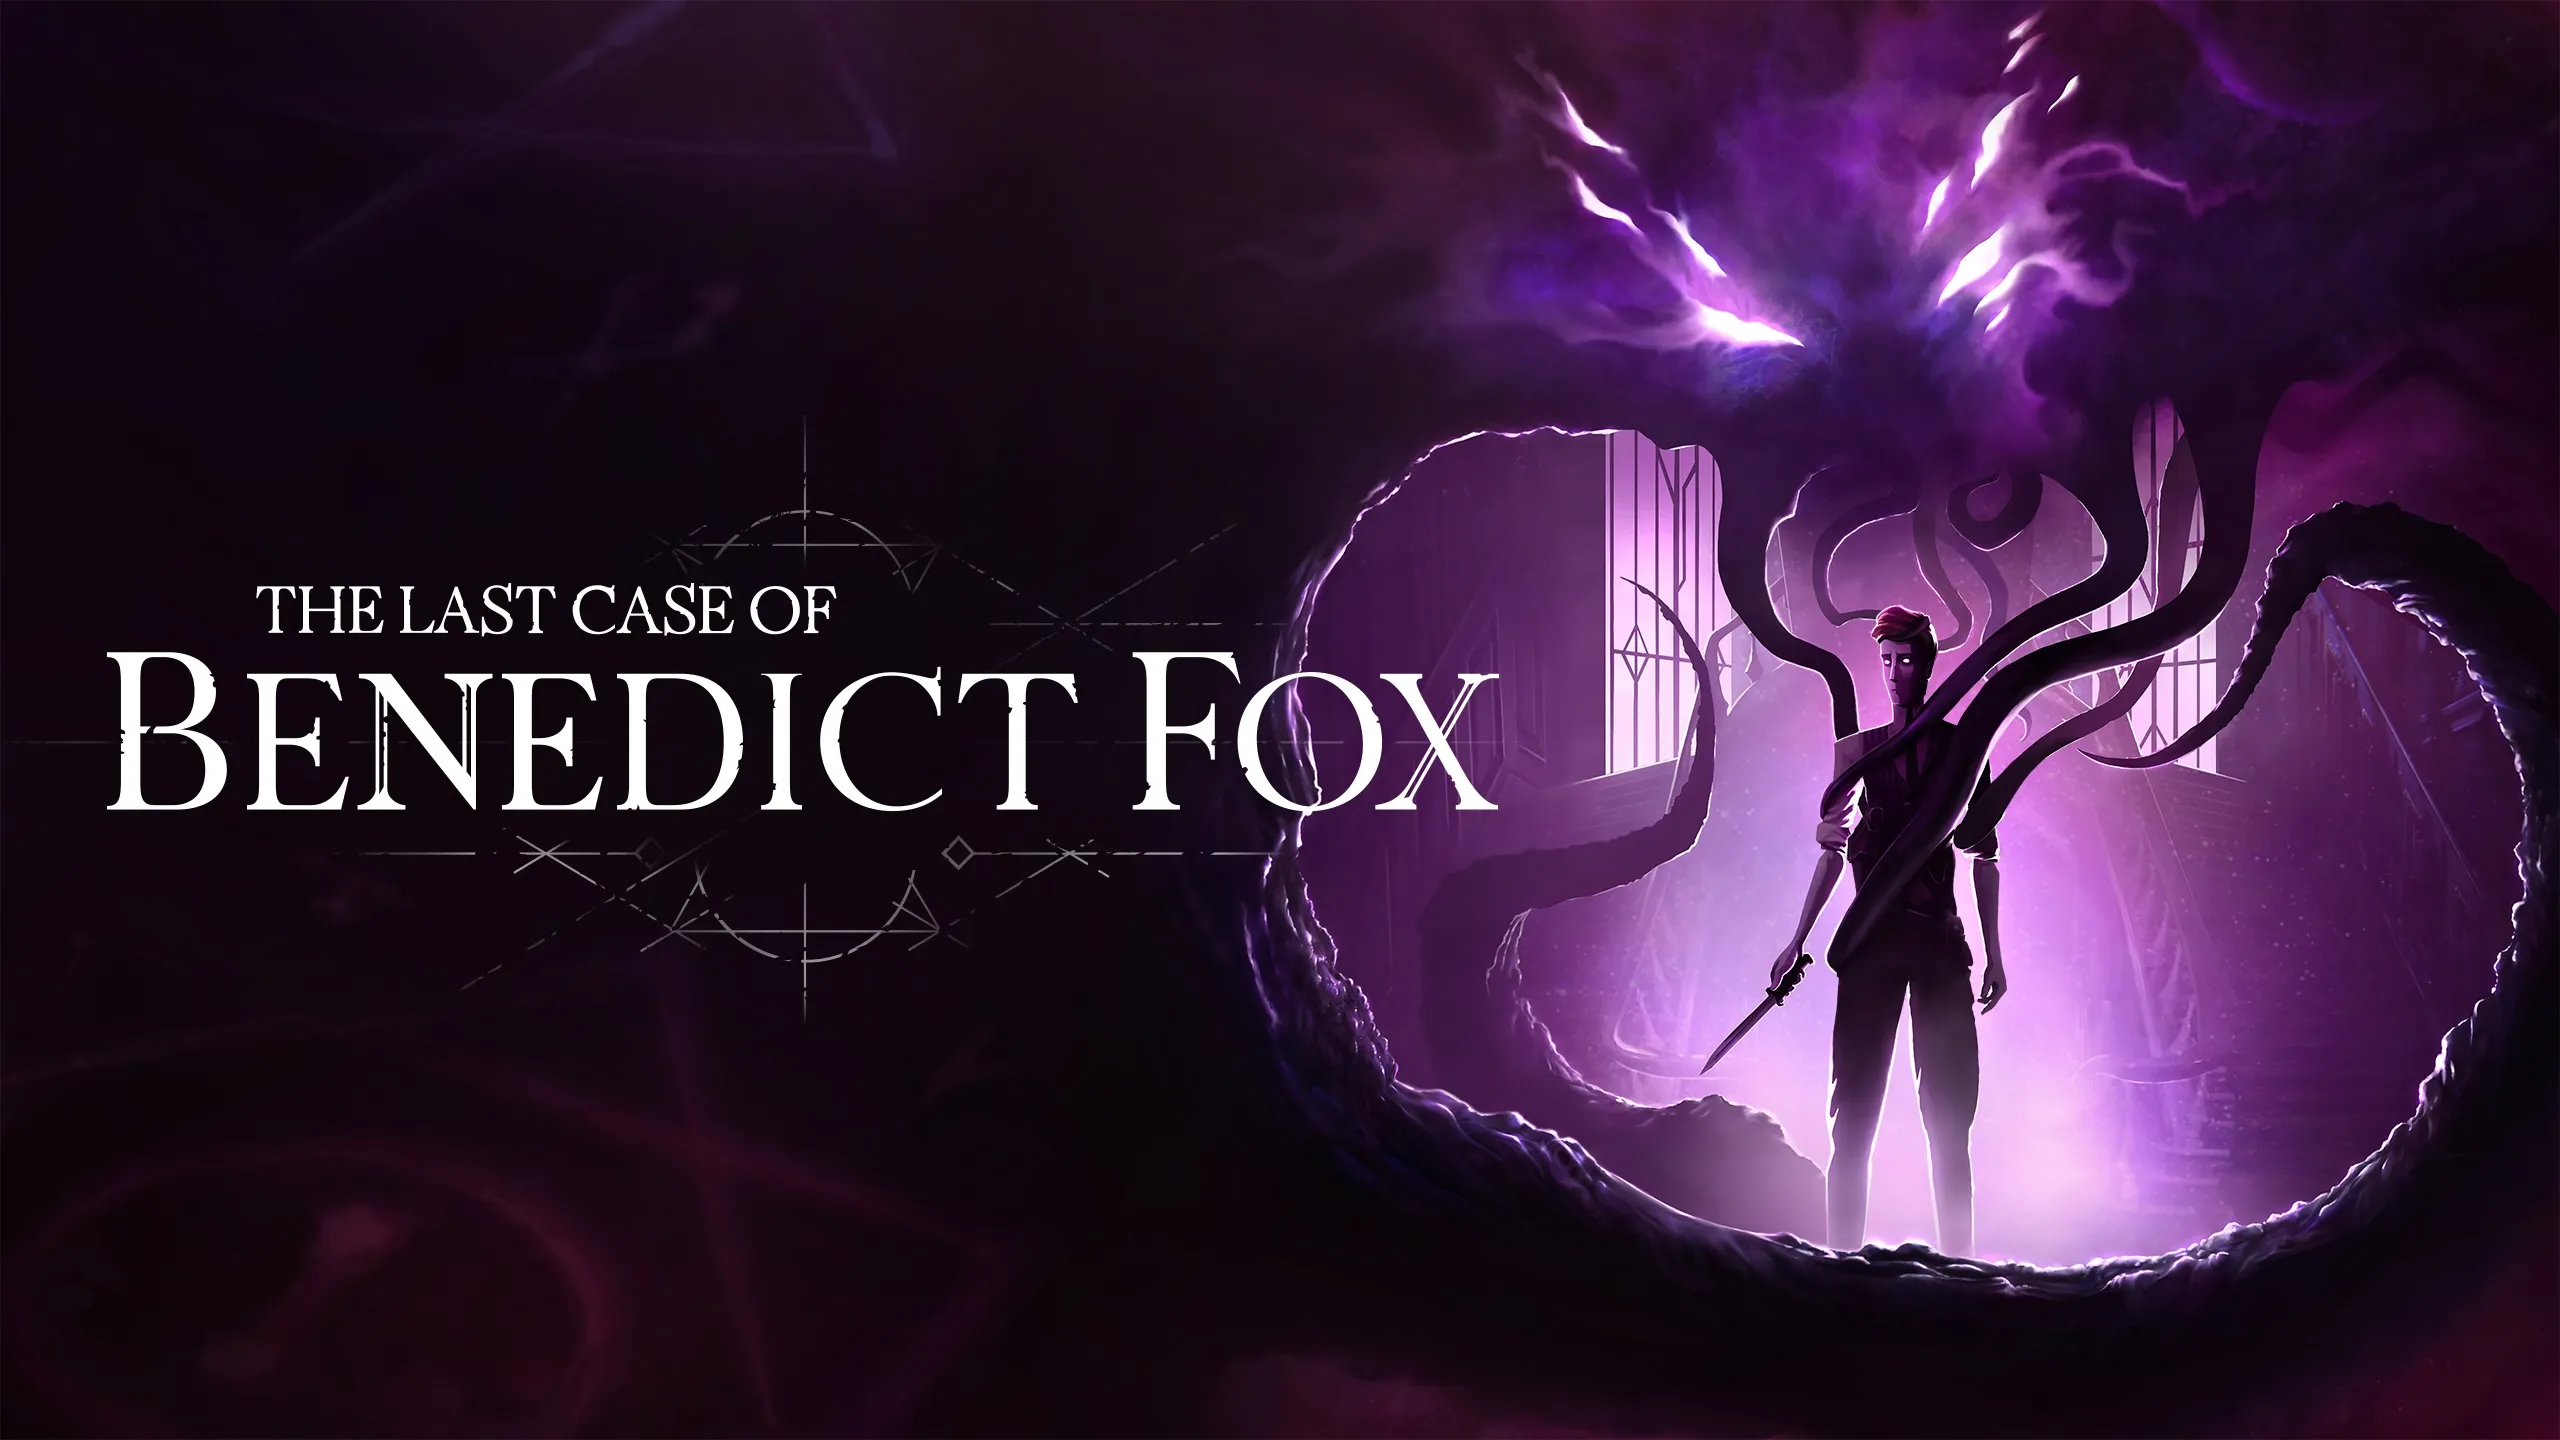 Plot Twist has announced the release date of The Last Case of Benedict Fox: Definitive Edition - 26 March